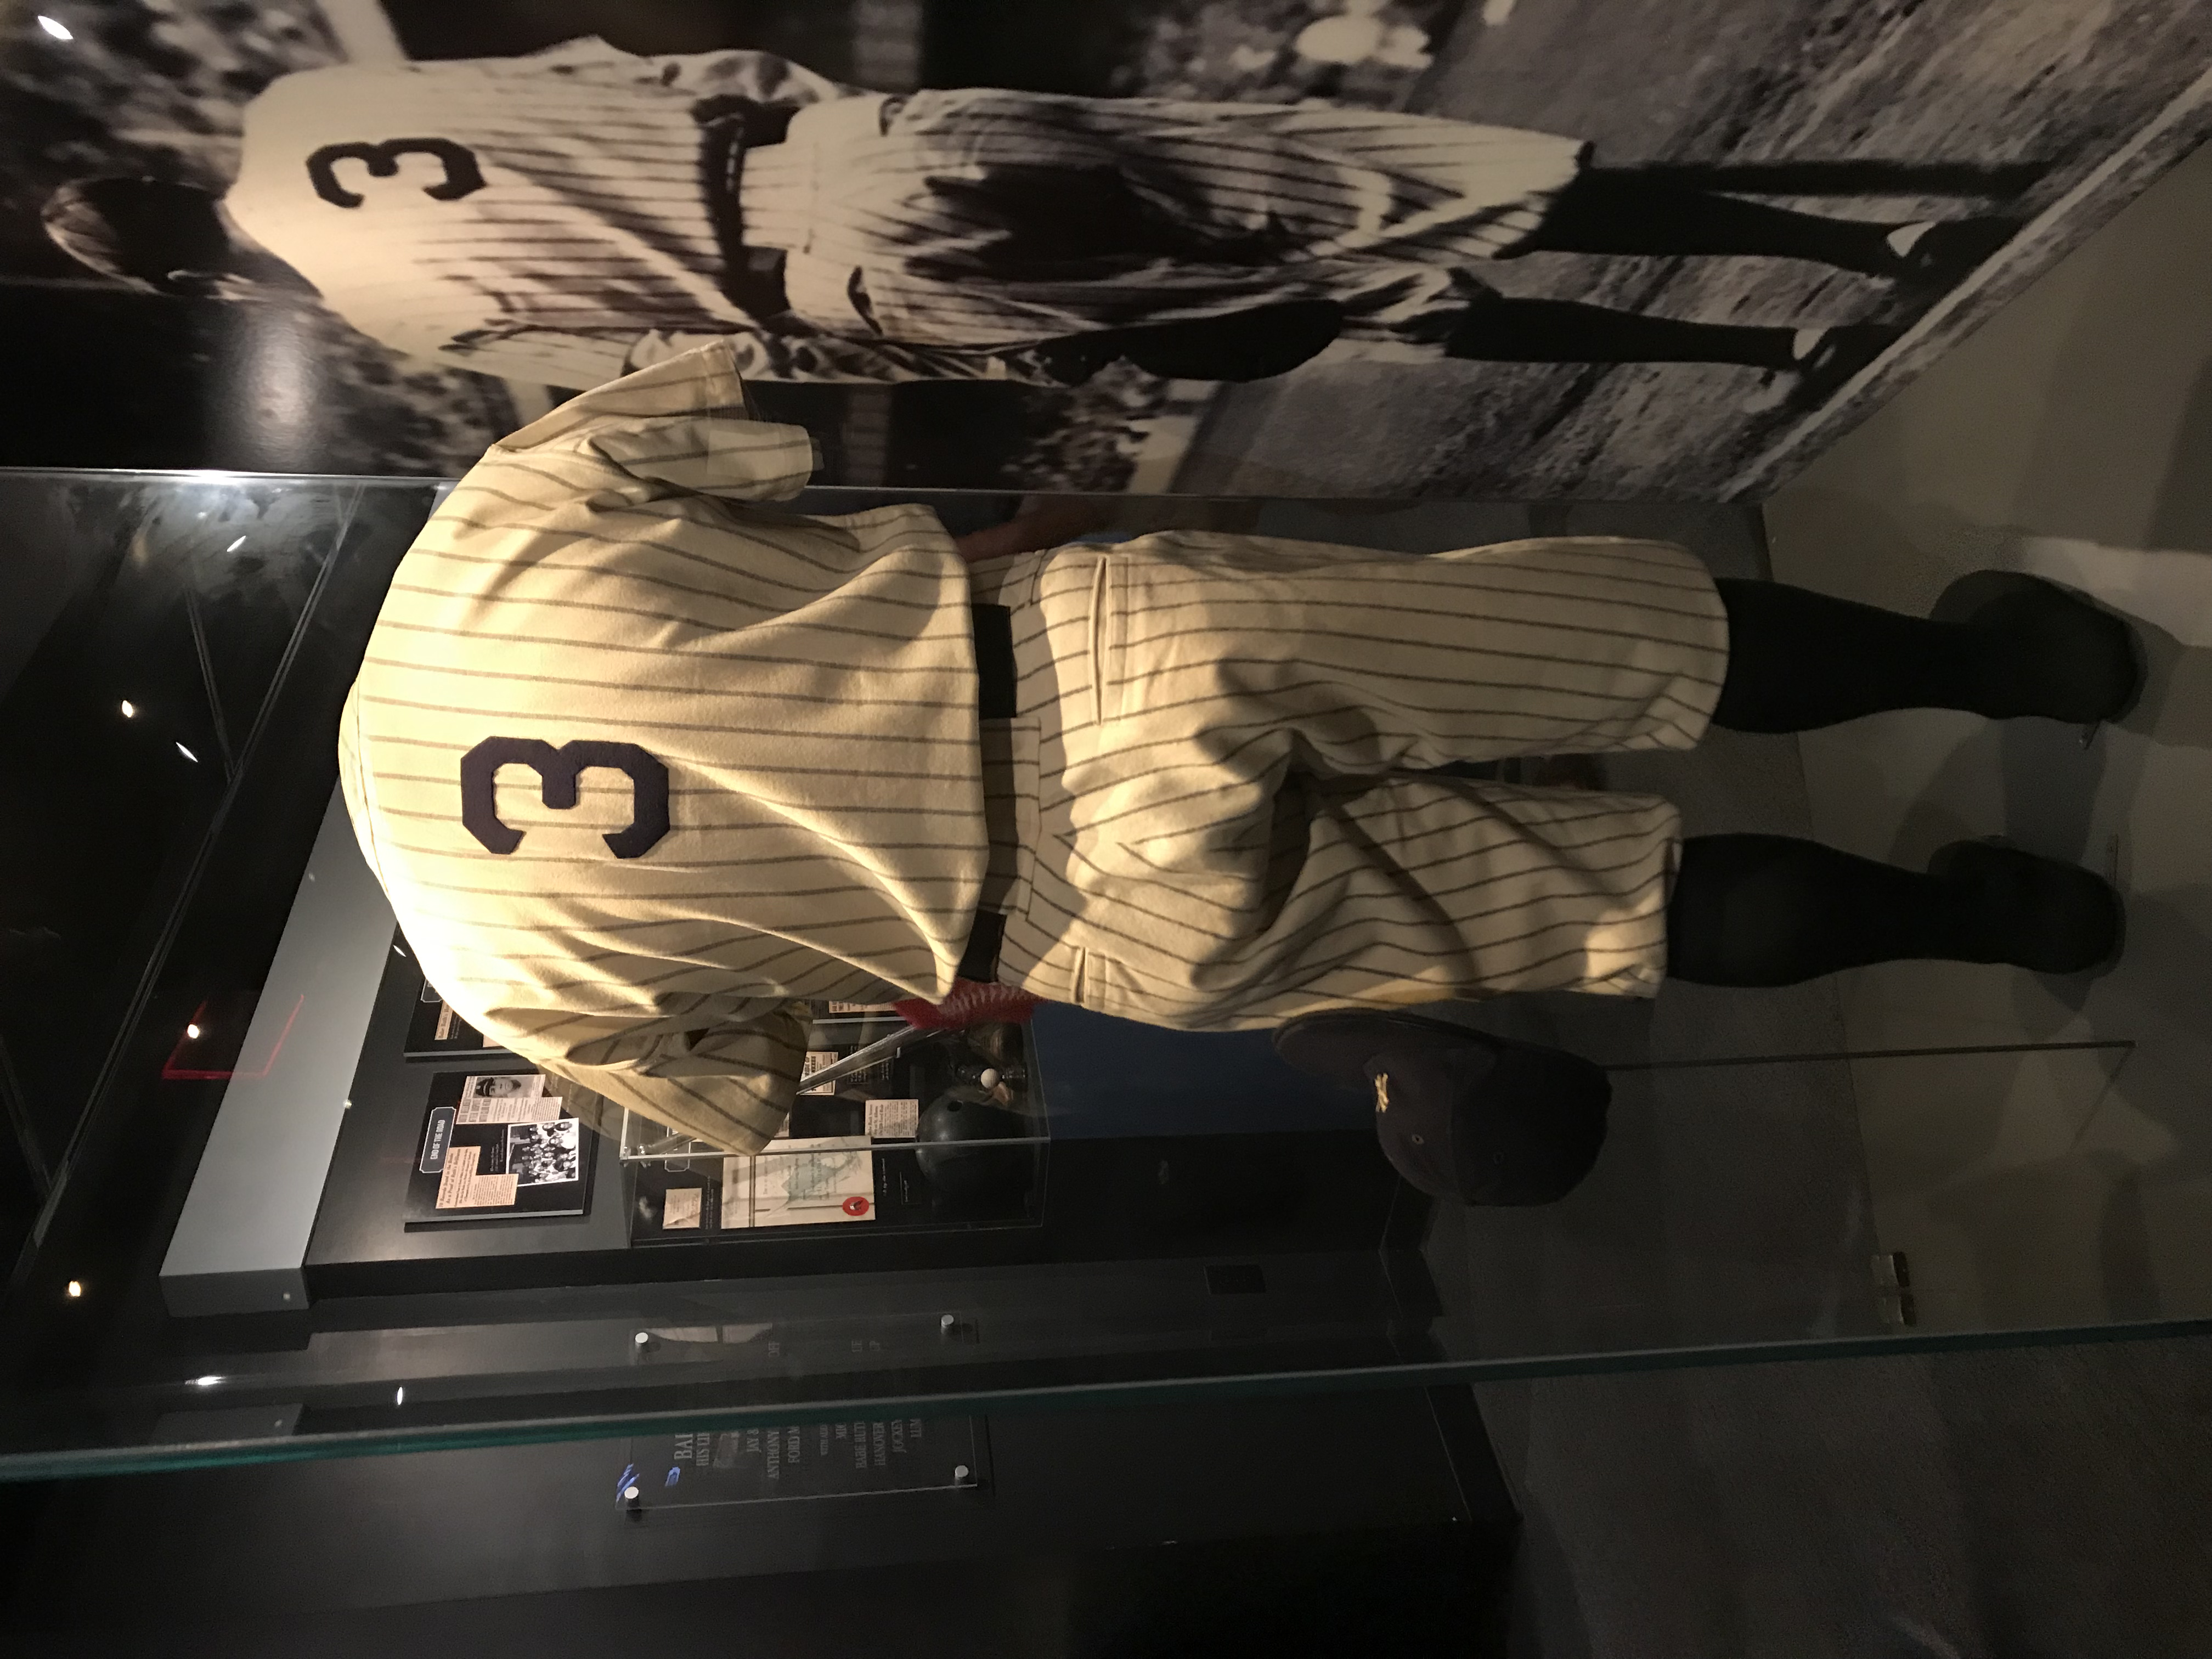 Babe Ruth’s uniform at the Baseball Hall of Fame.  Photo taken by and the property of FourWalls.